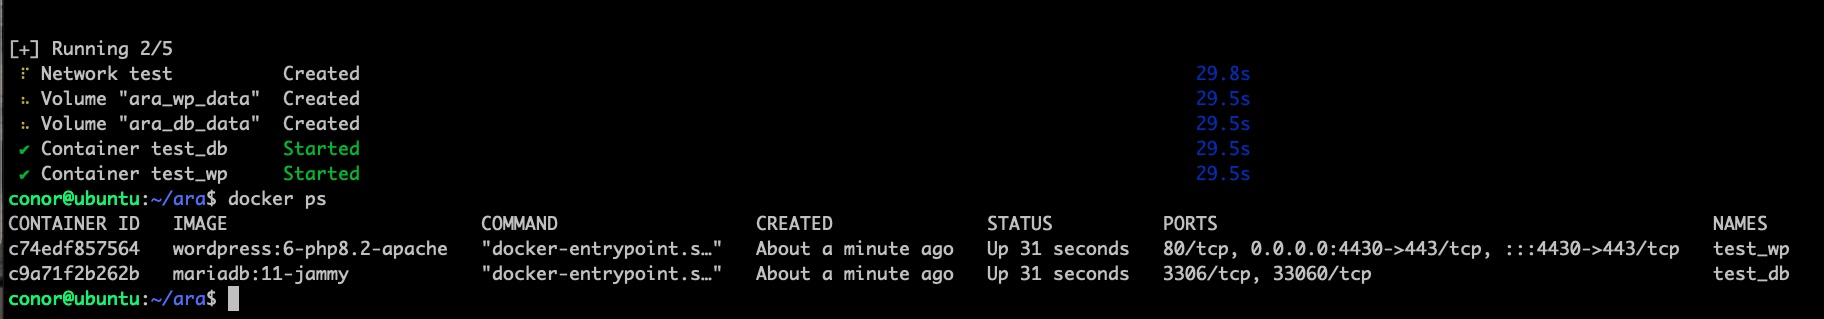 A screenshot of the terminal showing the output of 'docker ps' showing the status of the containers